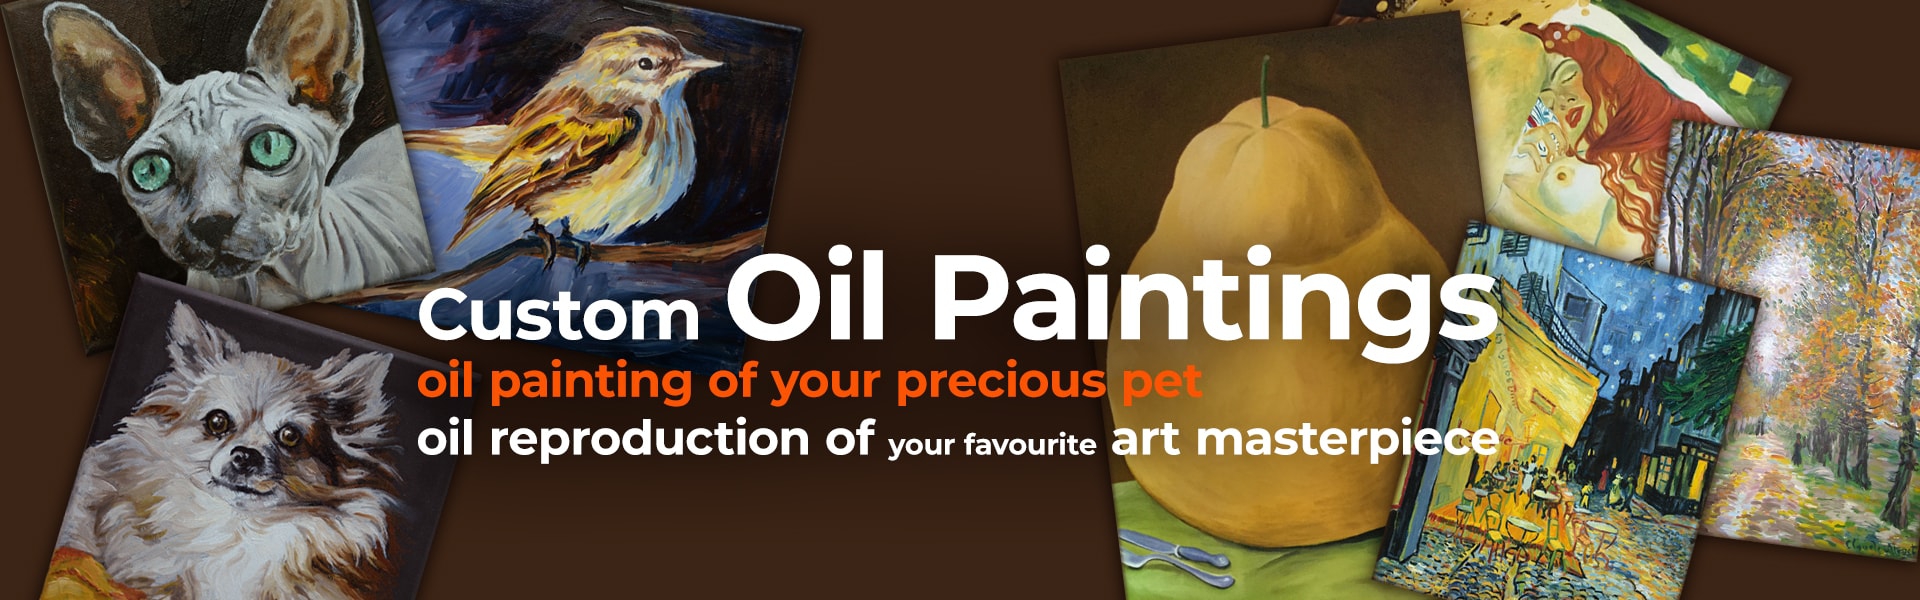 Custom Oil Paintings. Oil painting of your precious pet. Oil reproduction of your favourite art masterpiece.